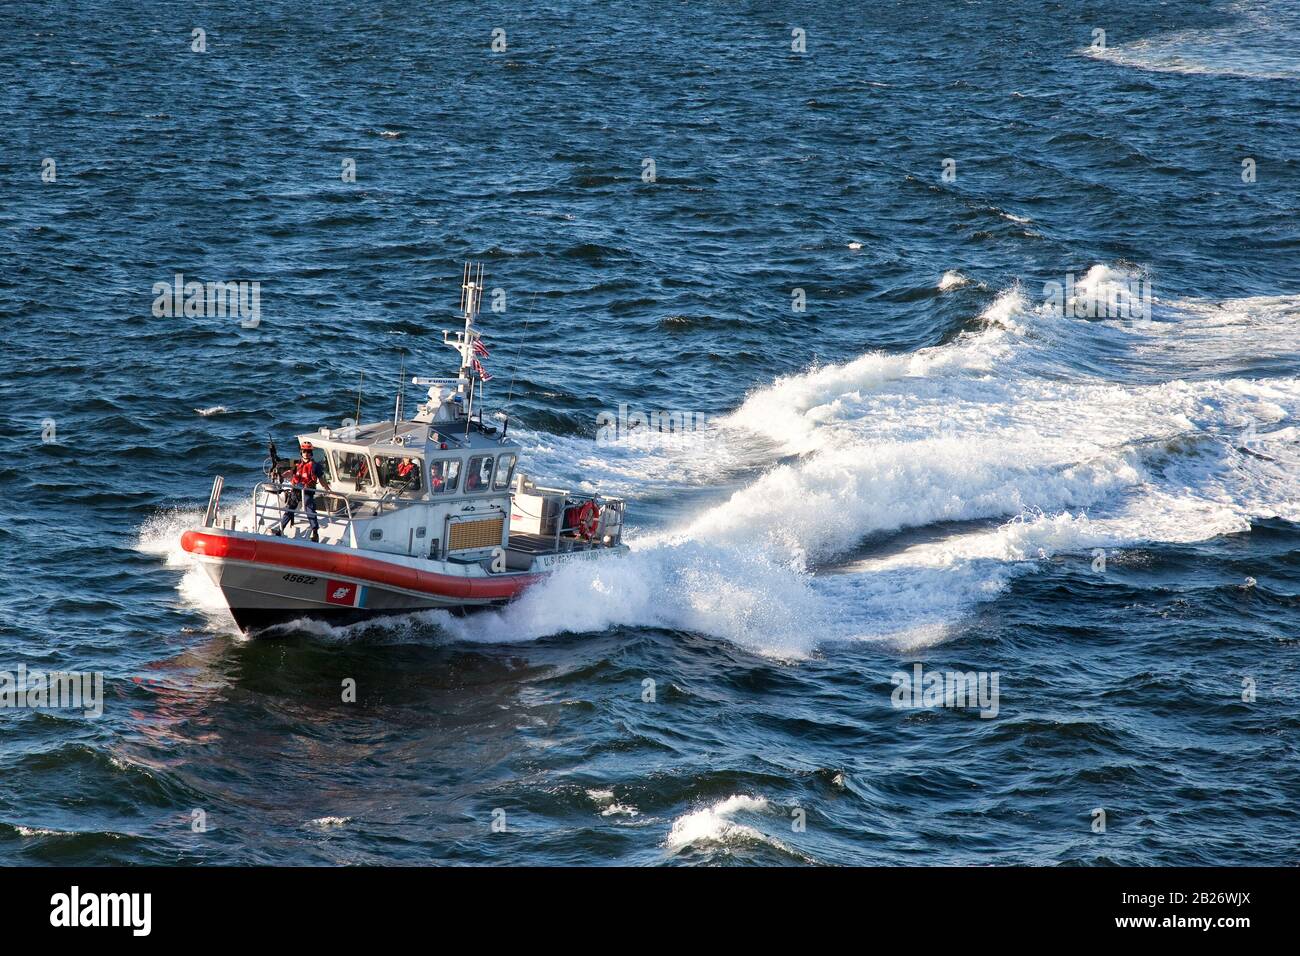 One of The Response Boat from the US Coast Guard on patrol Stock Photo